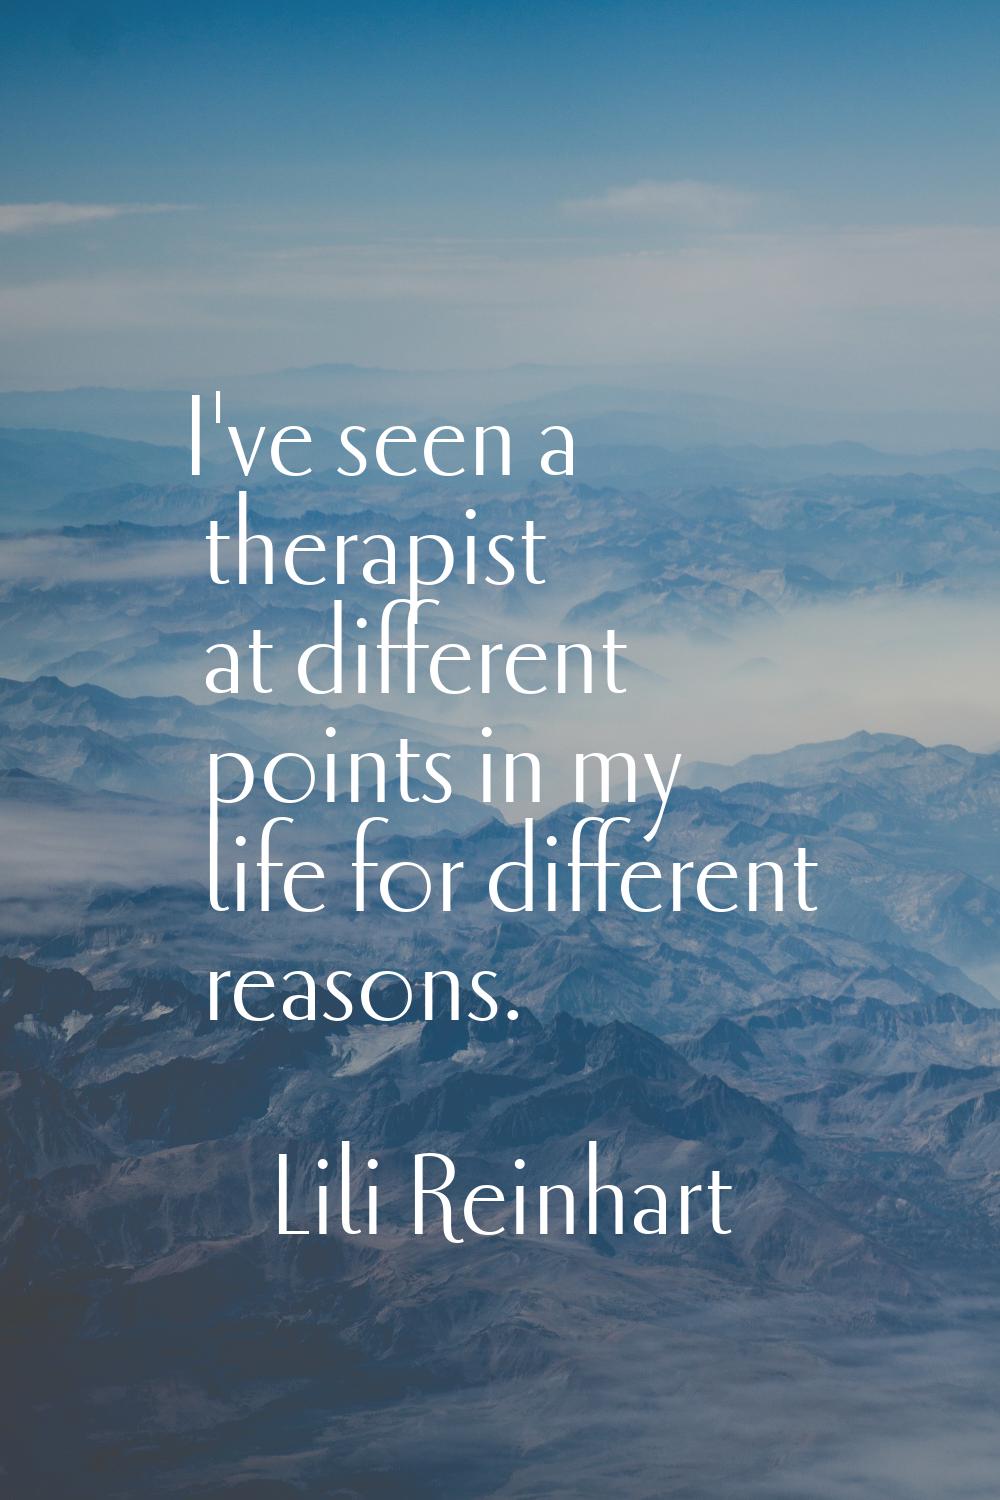 I've seen a therapist at different points in my life for different reasons.